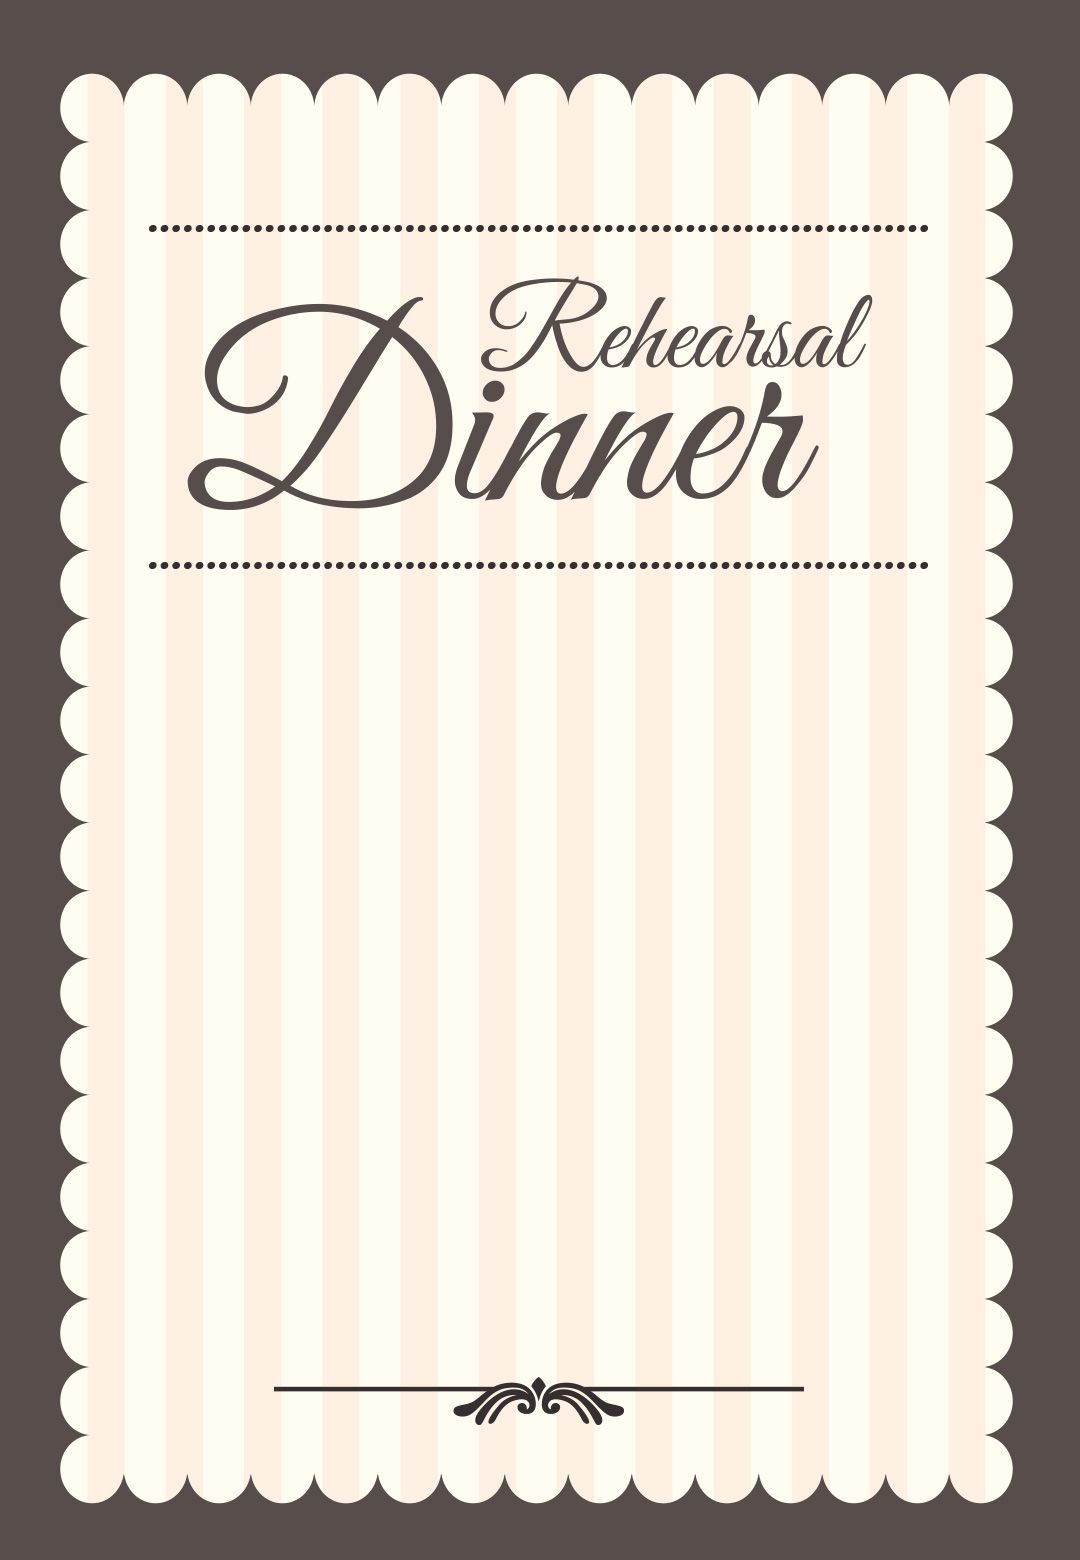 Stamped Rehearsal Dinner Free Printable Rehearsal Dinner Party throughout dimensions 1080 X 1560